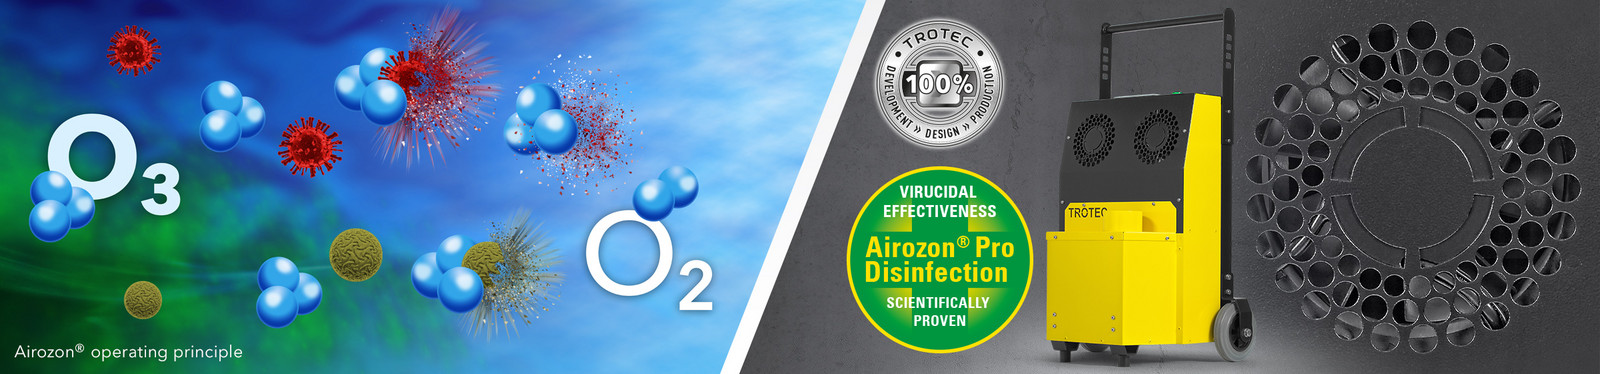 Professional ozone disinfector Airozon Supercracker from Trotec